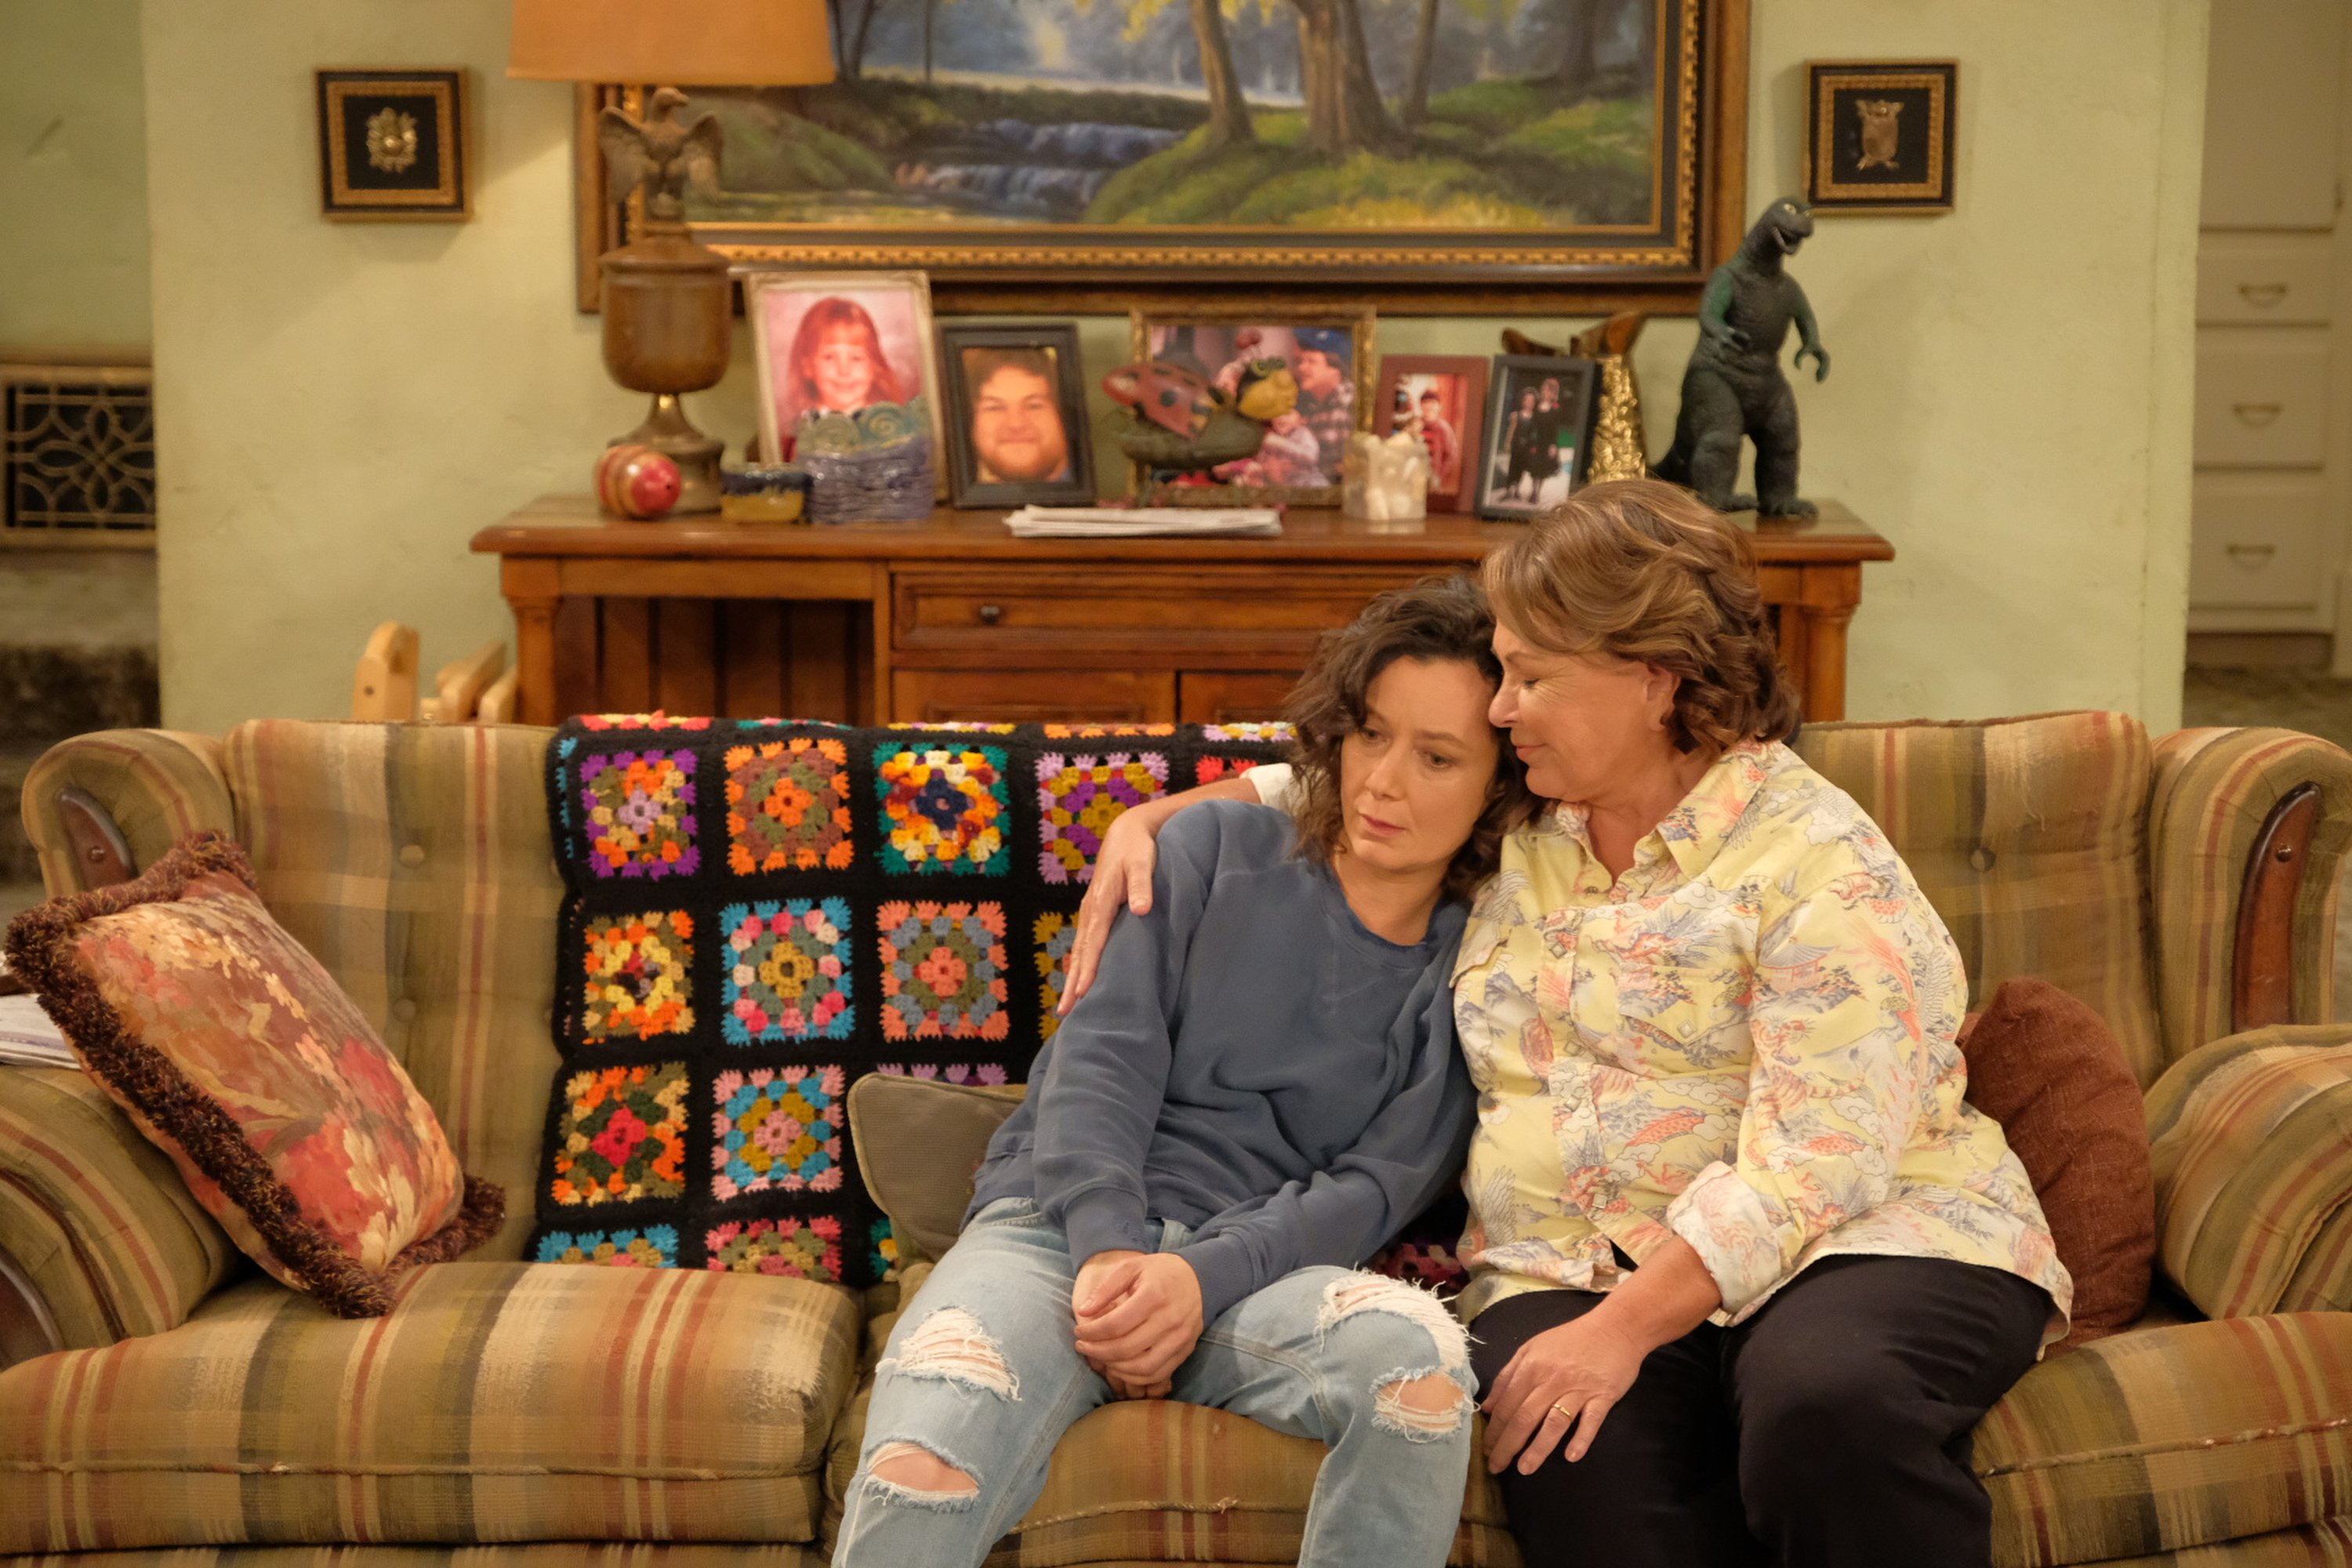 Roseanne Barr and Sara Gilbert in a scene from "Roseanne," 2017 | Source: Getty Images